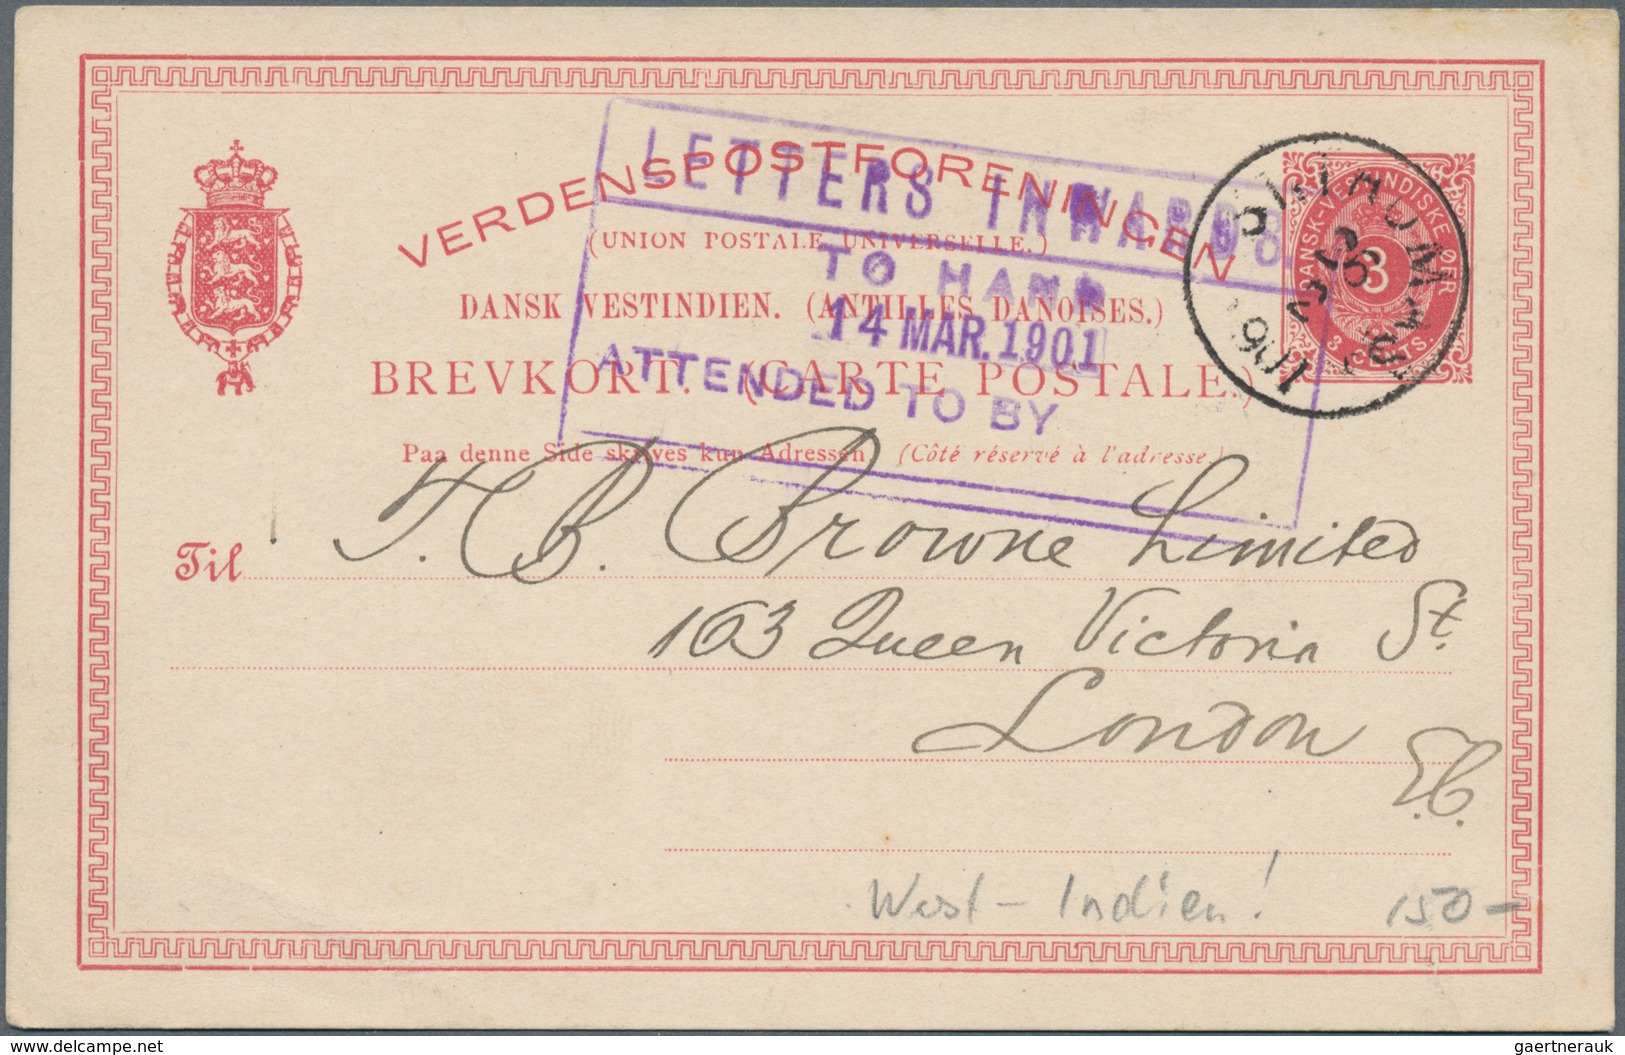 Dänemark: 1840's-1940's (ca.): More than 60 covers, postcards, postal stationery items and picture p